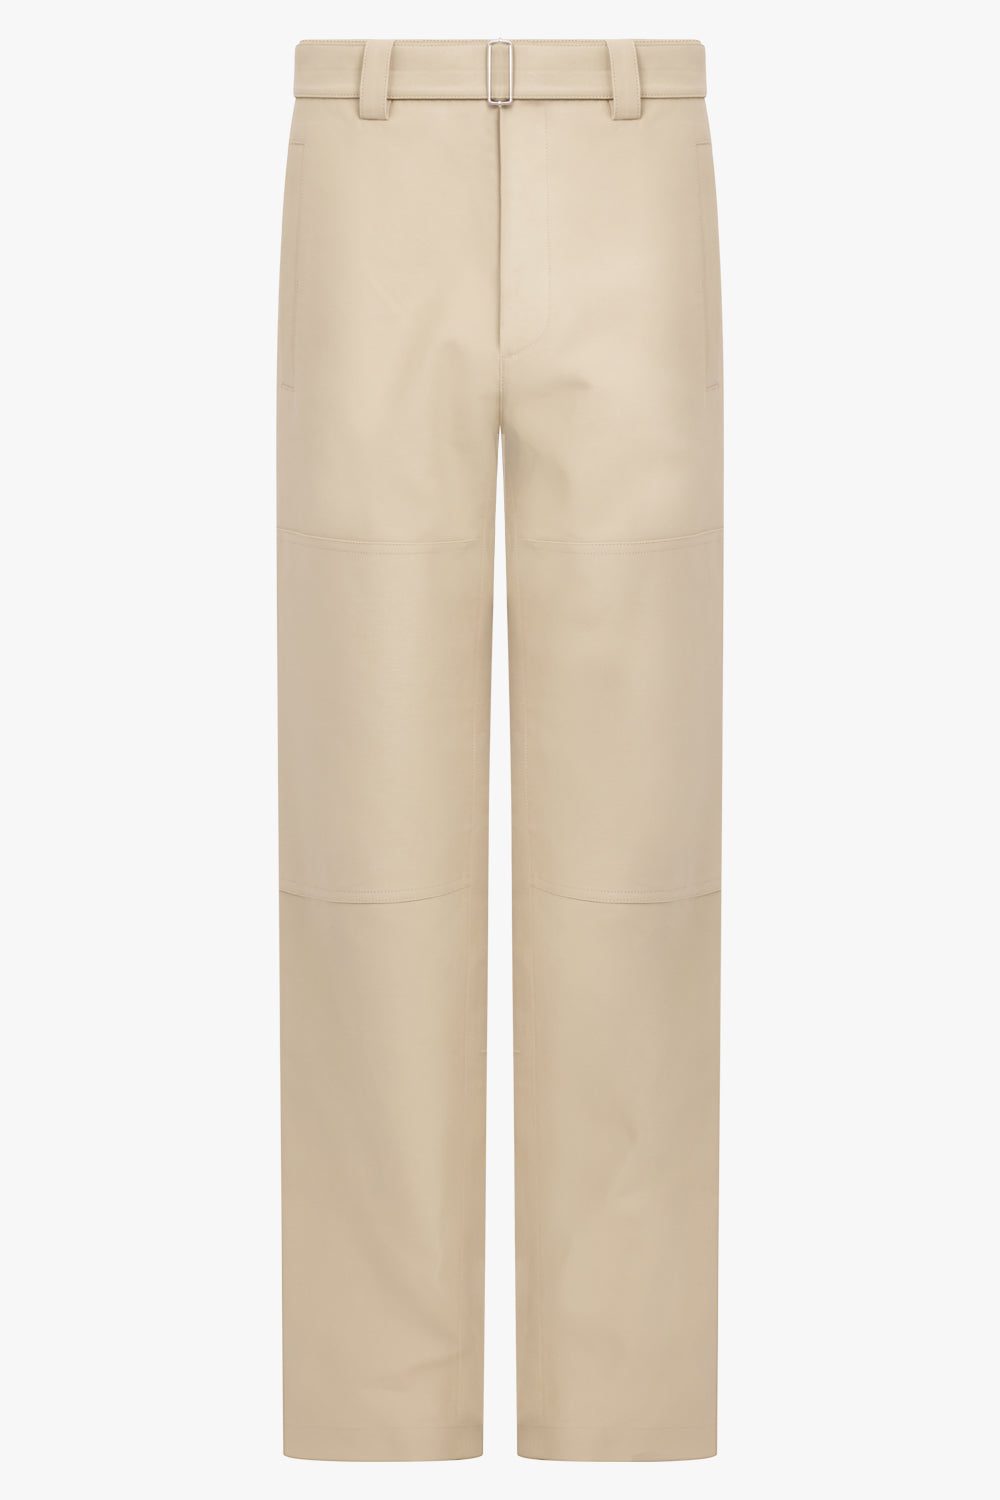 AFTER PRAY RTW Belted Double Knee Straight Pant | Beige